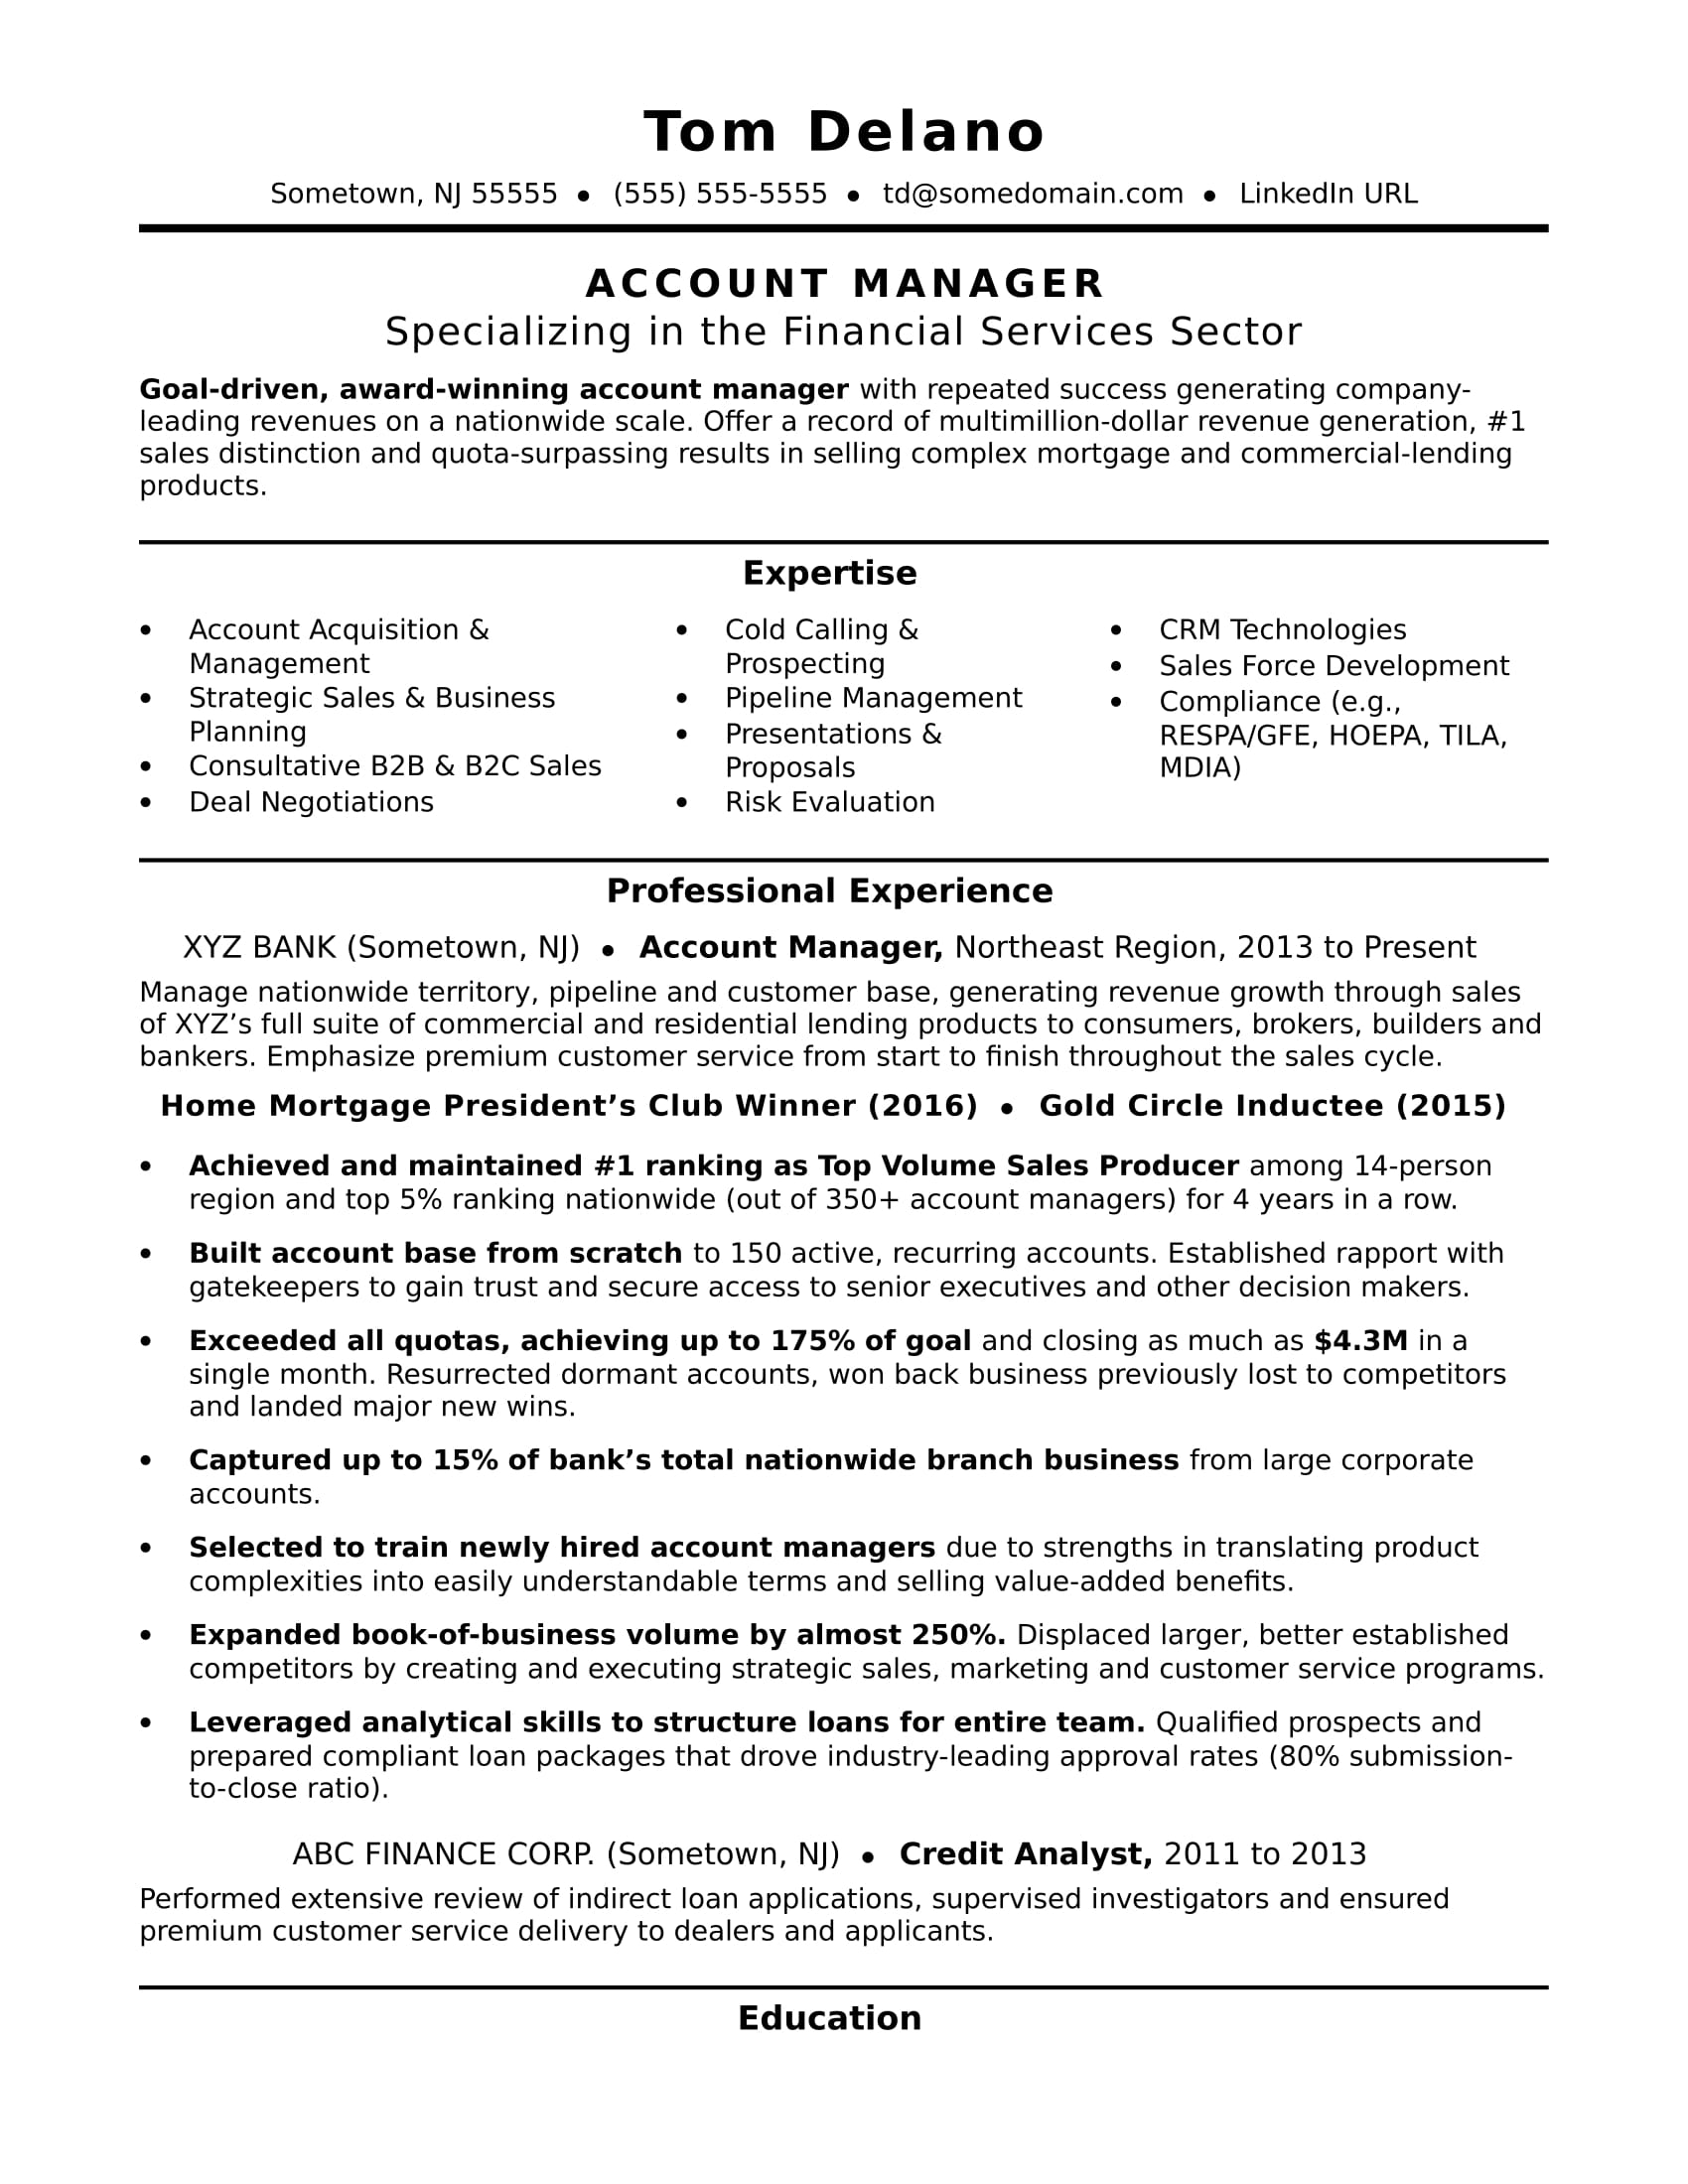 account manager resume sample monster com